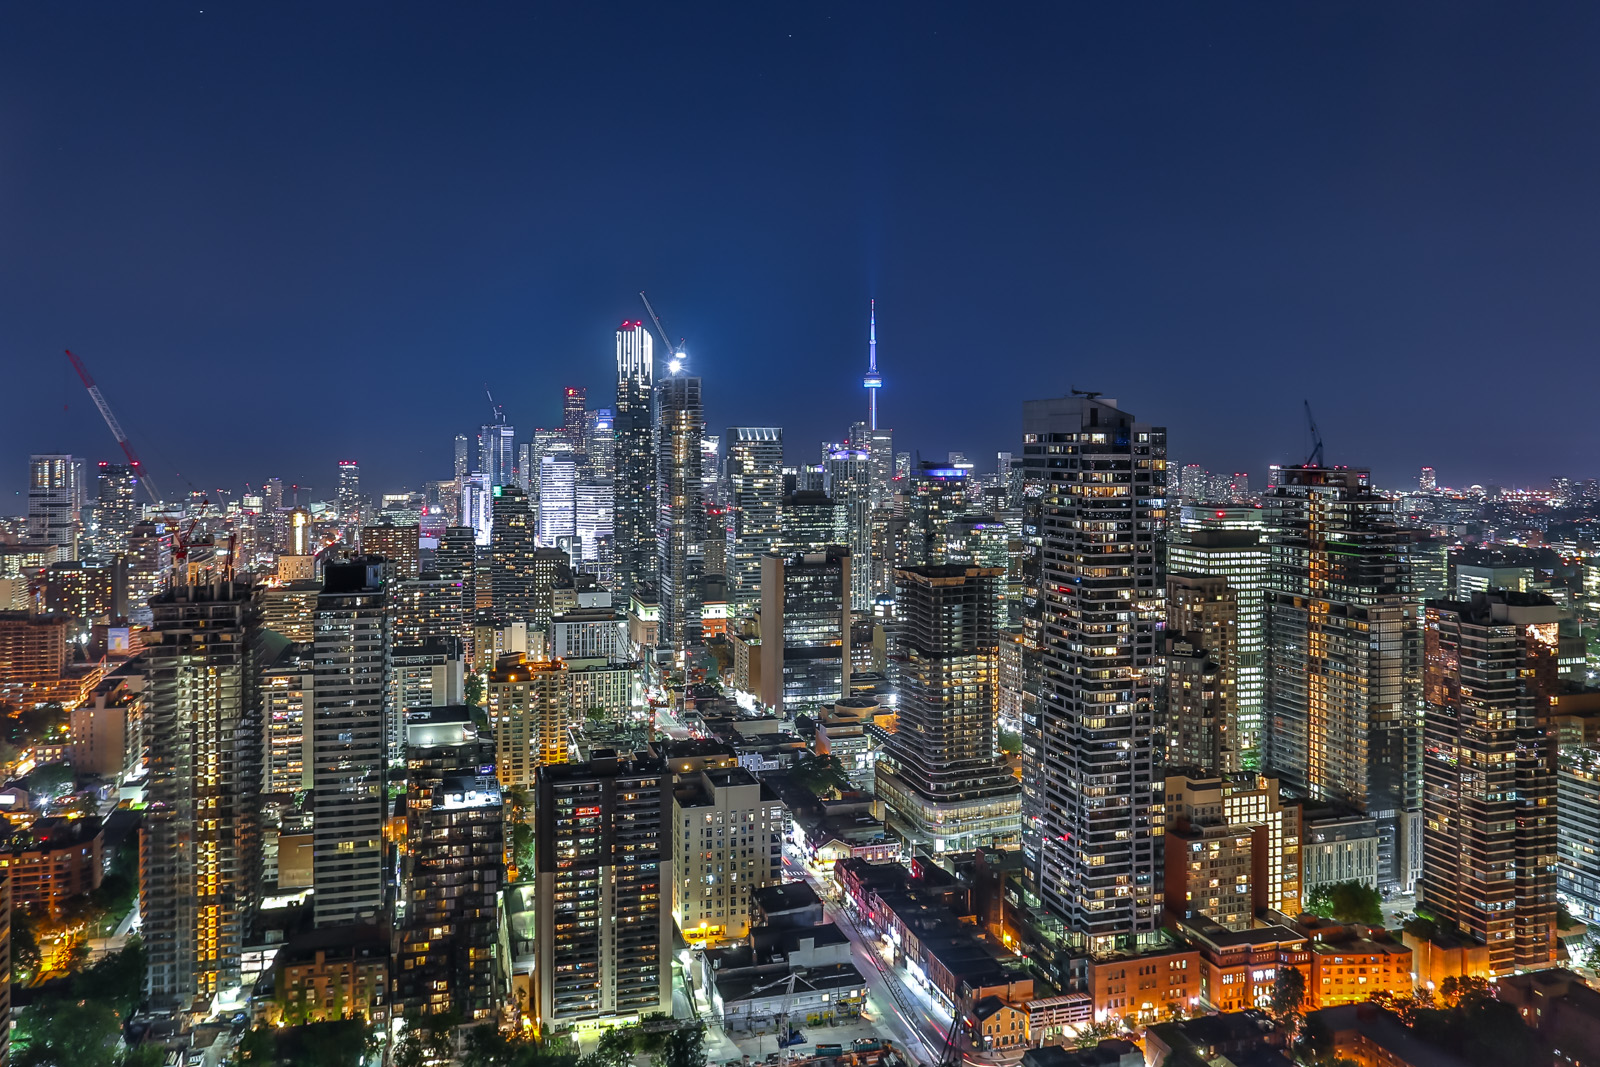 Toronto skyline at night shows its transformation into a buyers market.